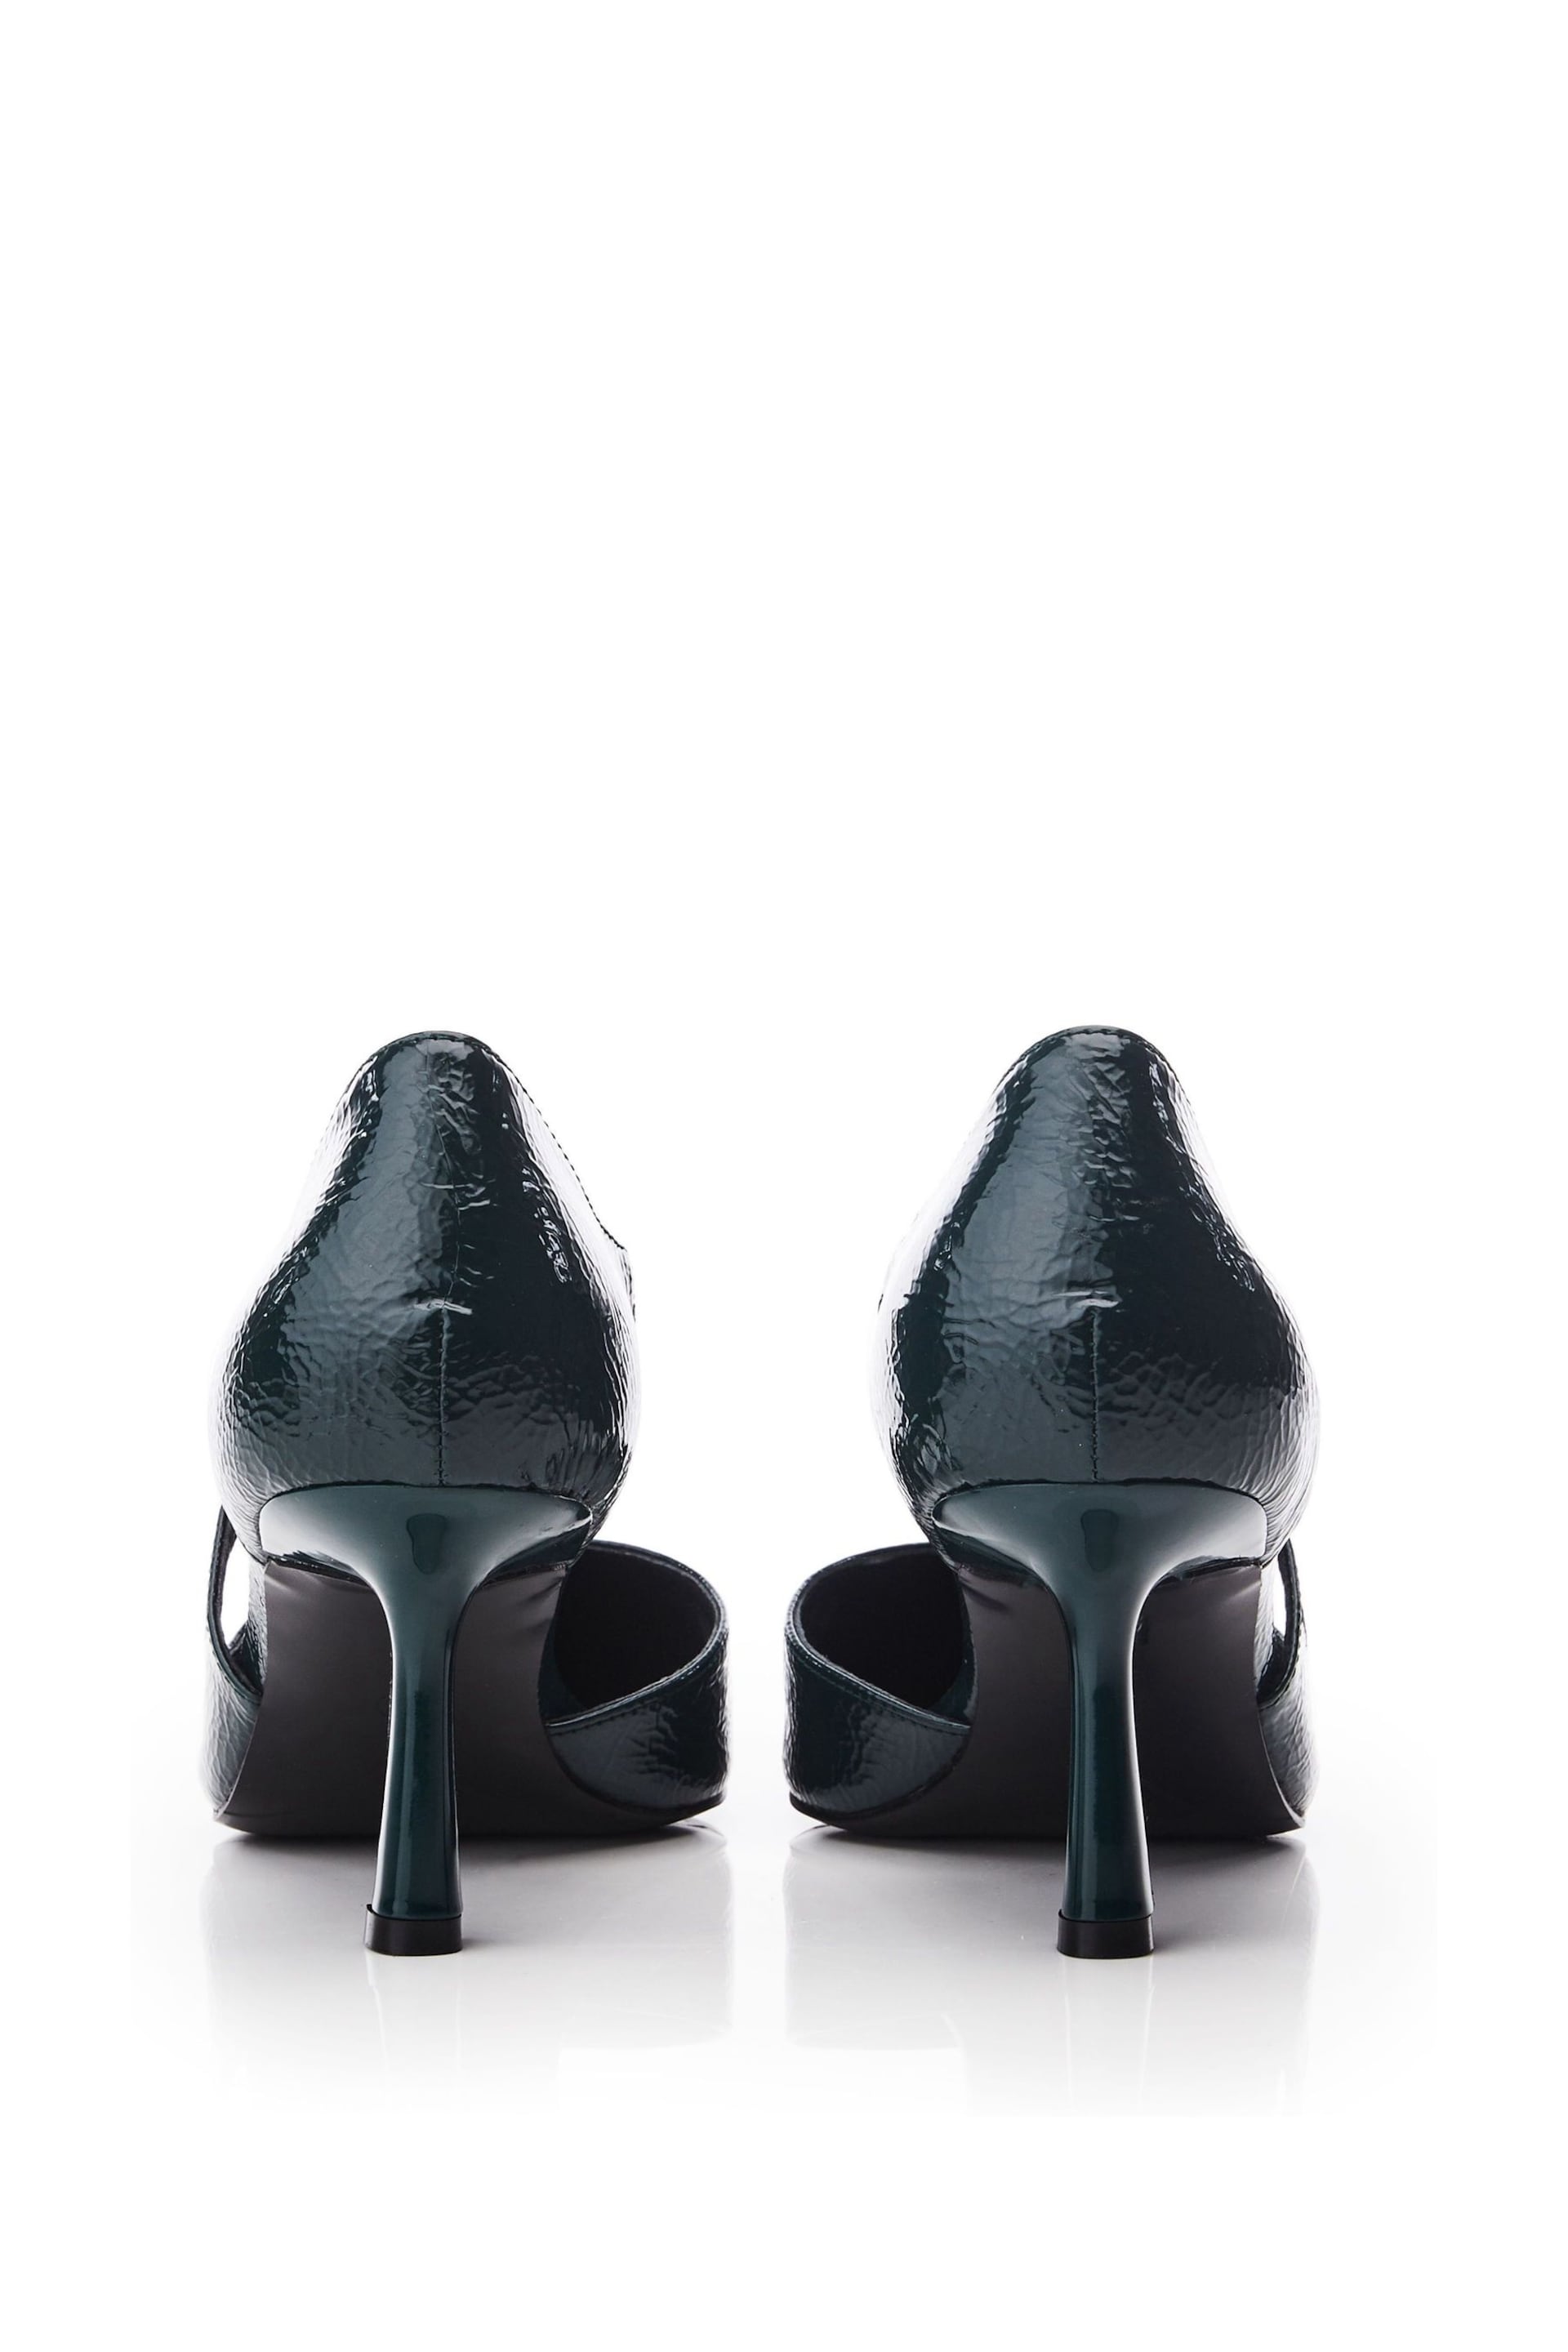 Moda in Pelle Daleiza Heeled Pointed Crossover Court Black Shoes - Image 3 of 4